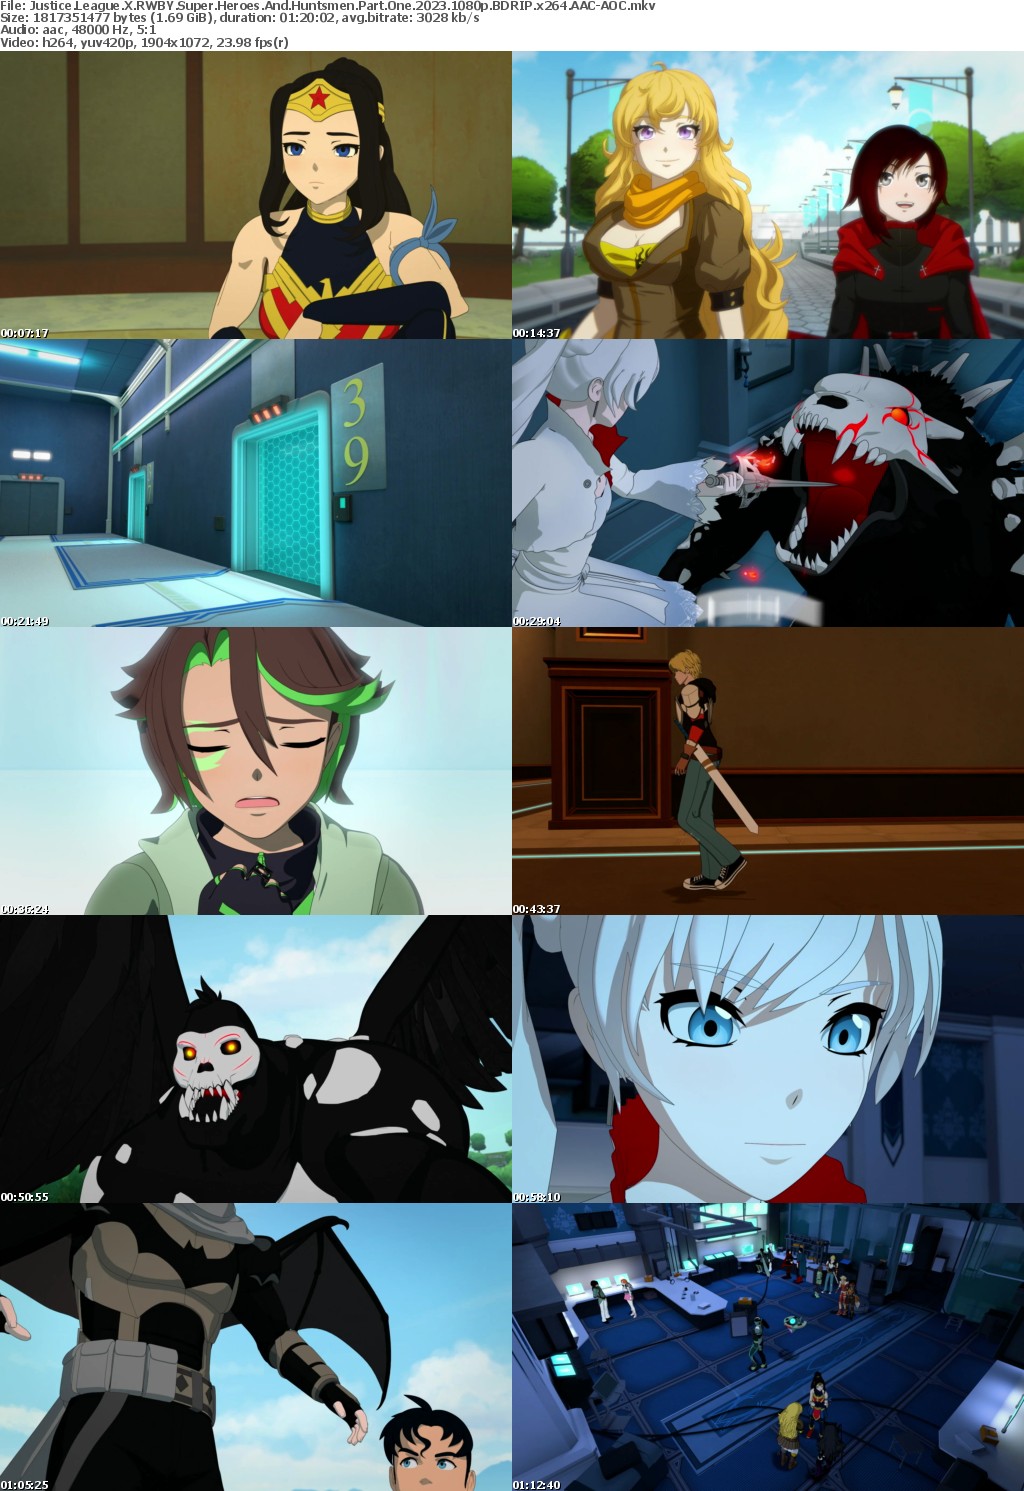 Justice League X RWBY Super Heroes And Huntsmen Part One 2023 1080p BDRIP x264 AAC-AOC